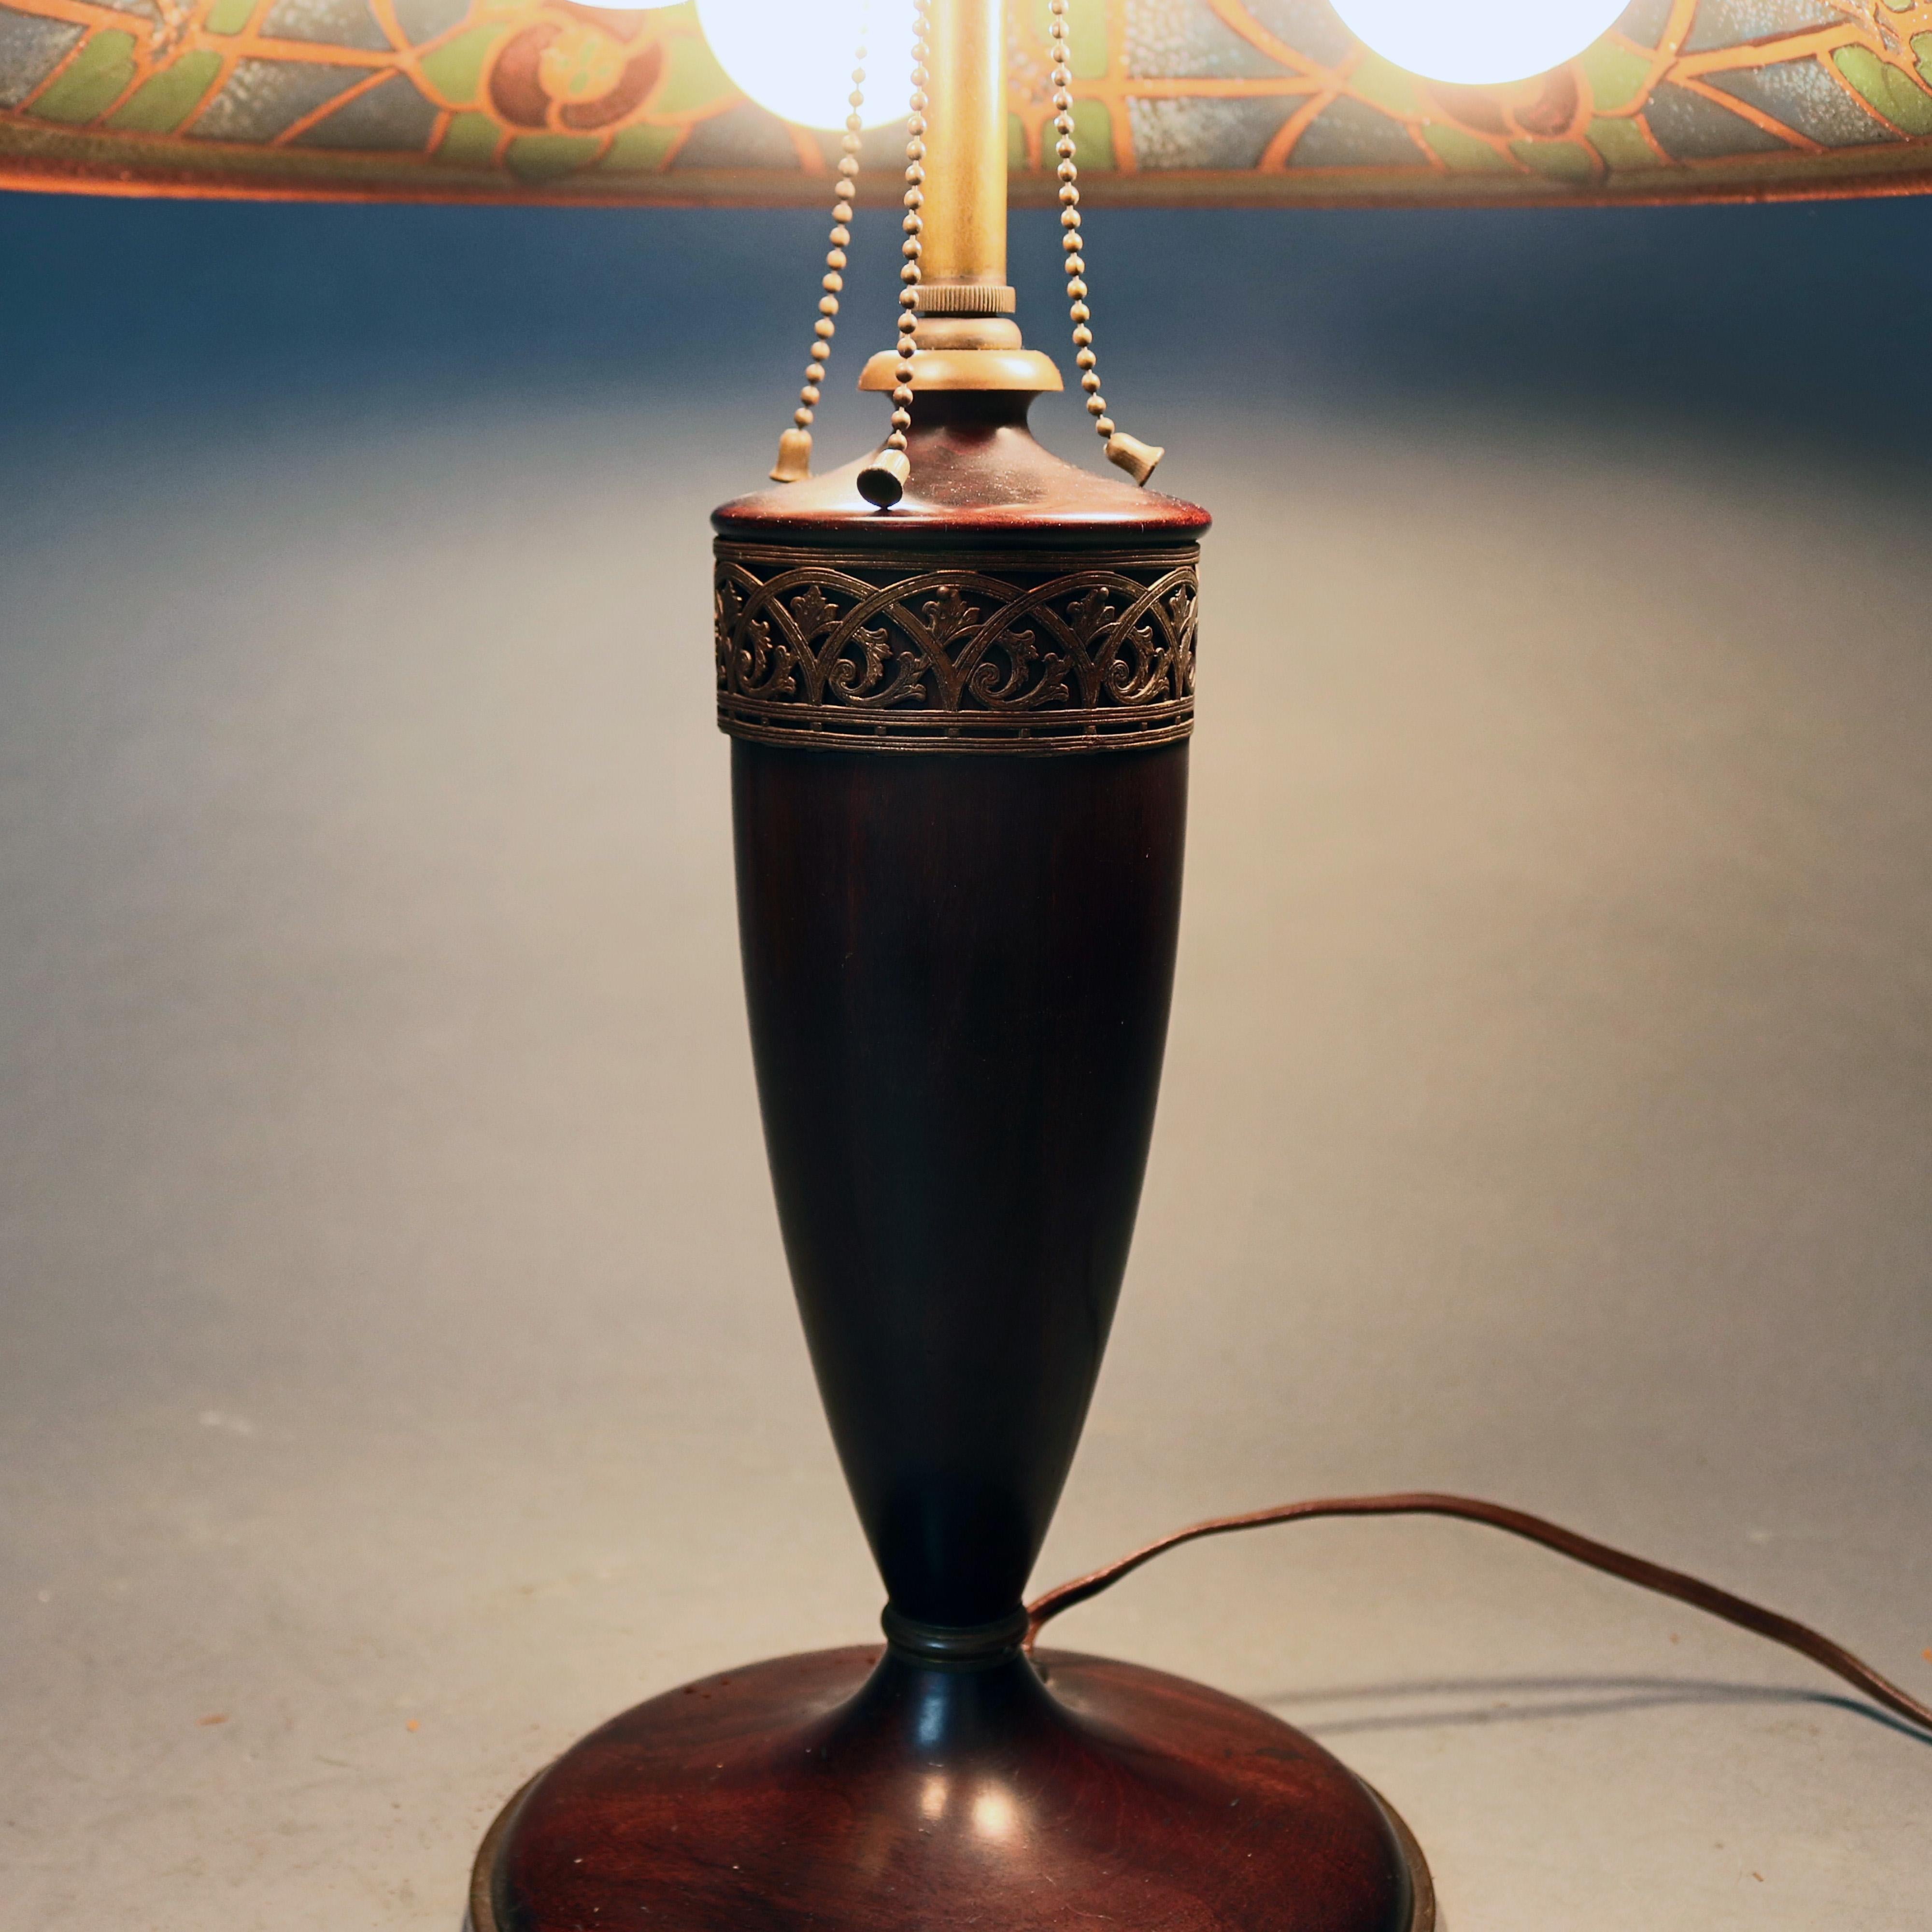 American Antique Arts & Crafts Stylized Floral Reverse Painted Pairpoint Lamp, circa 1920